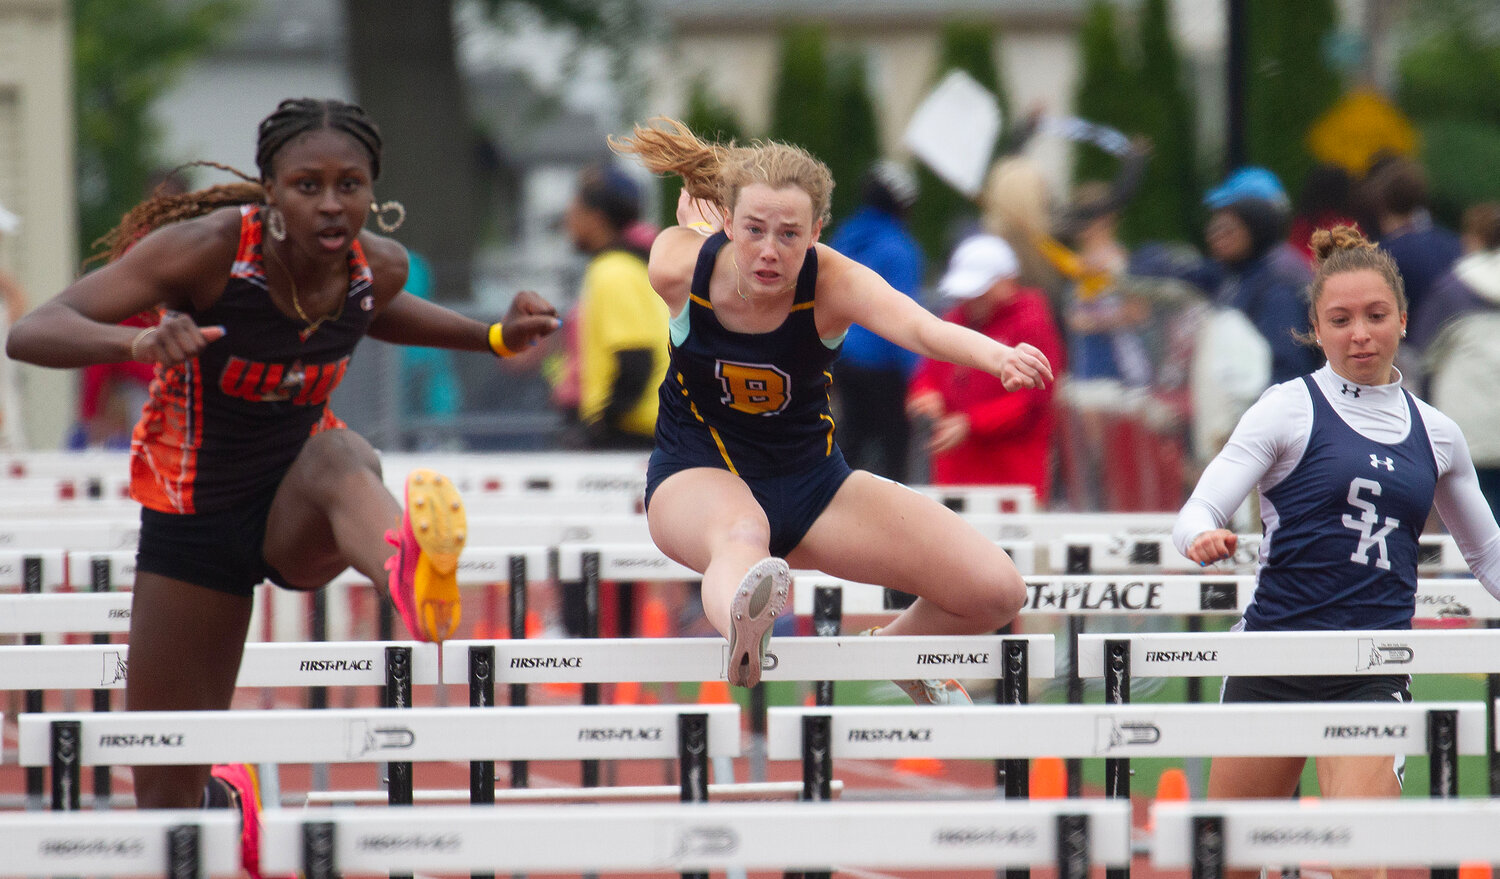 Barrington's Jordan Roskiewicz (center) competes in the 100-meter hurdles at the state track meet.